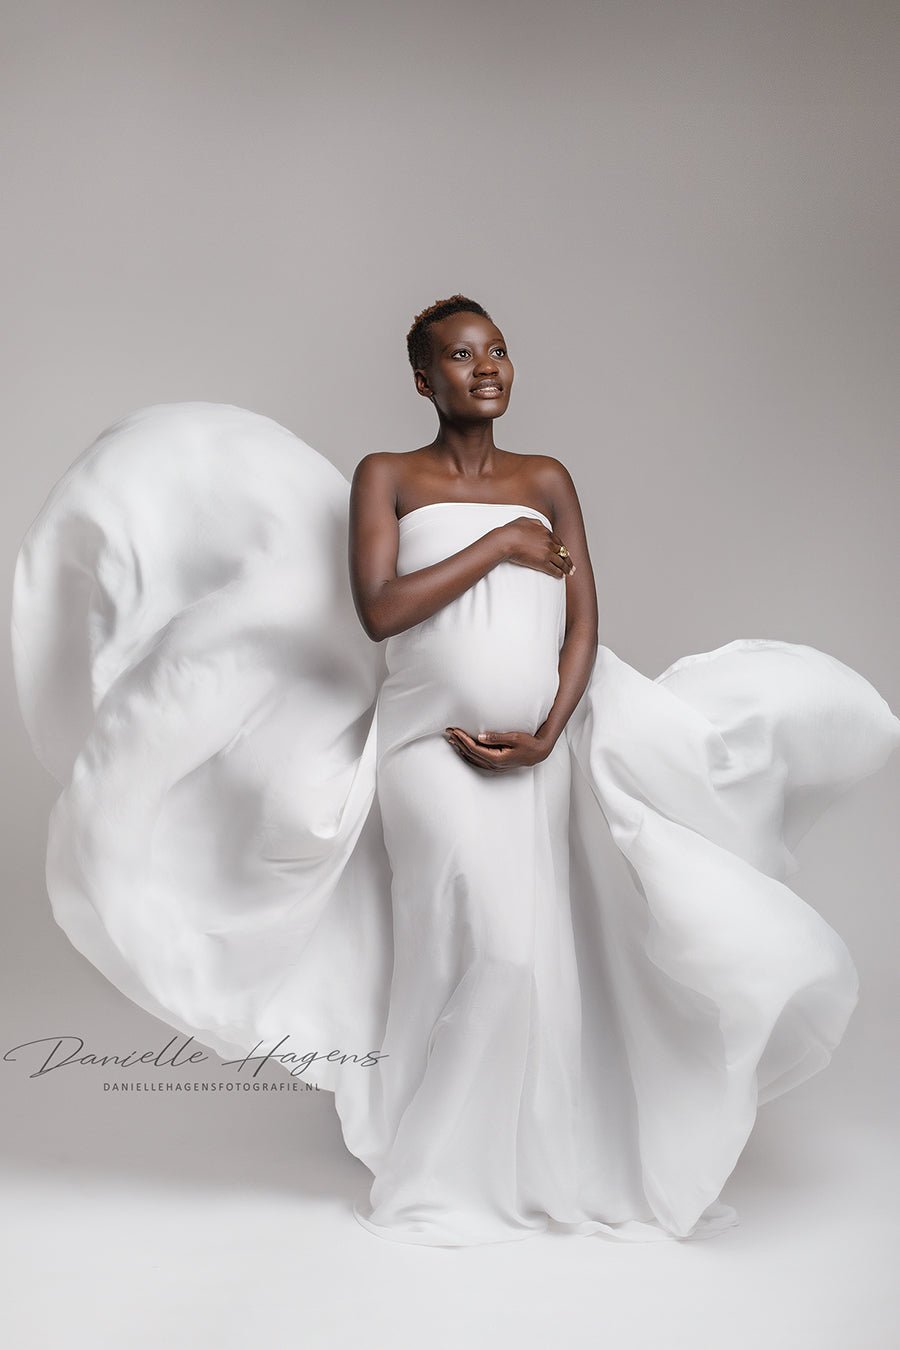 pregnant model poses covering her body with an off white silky scarf. she looks above white holds her belly bump.